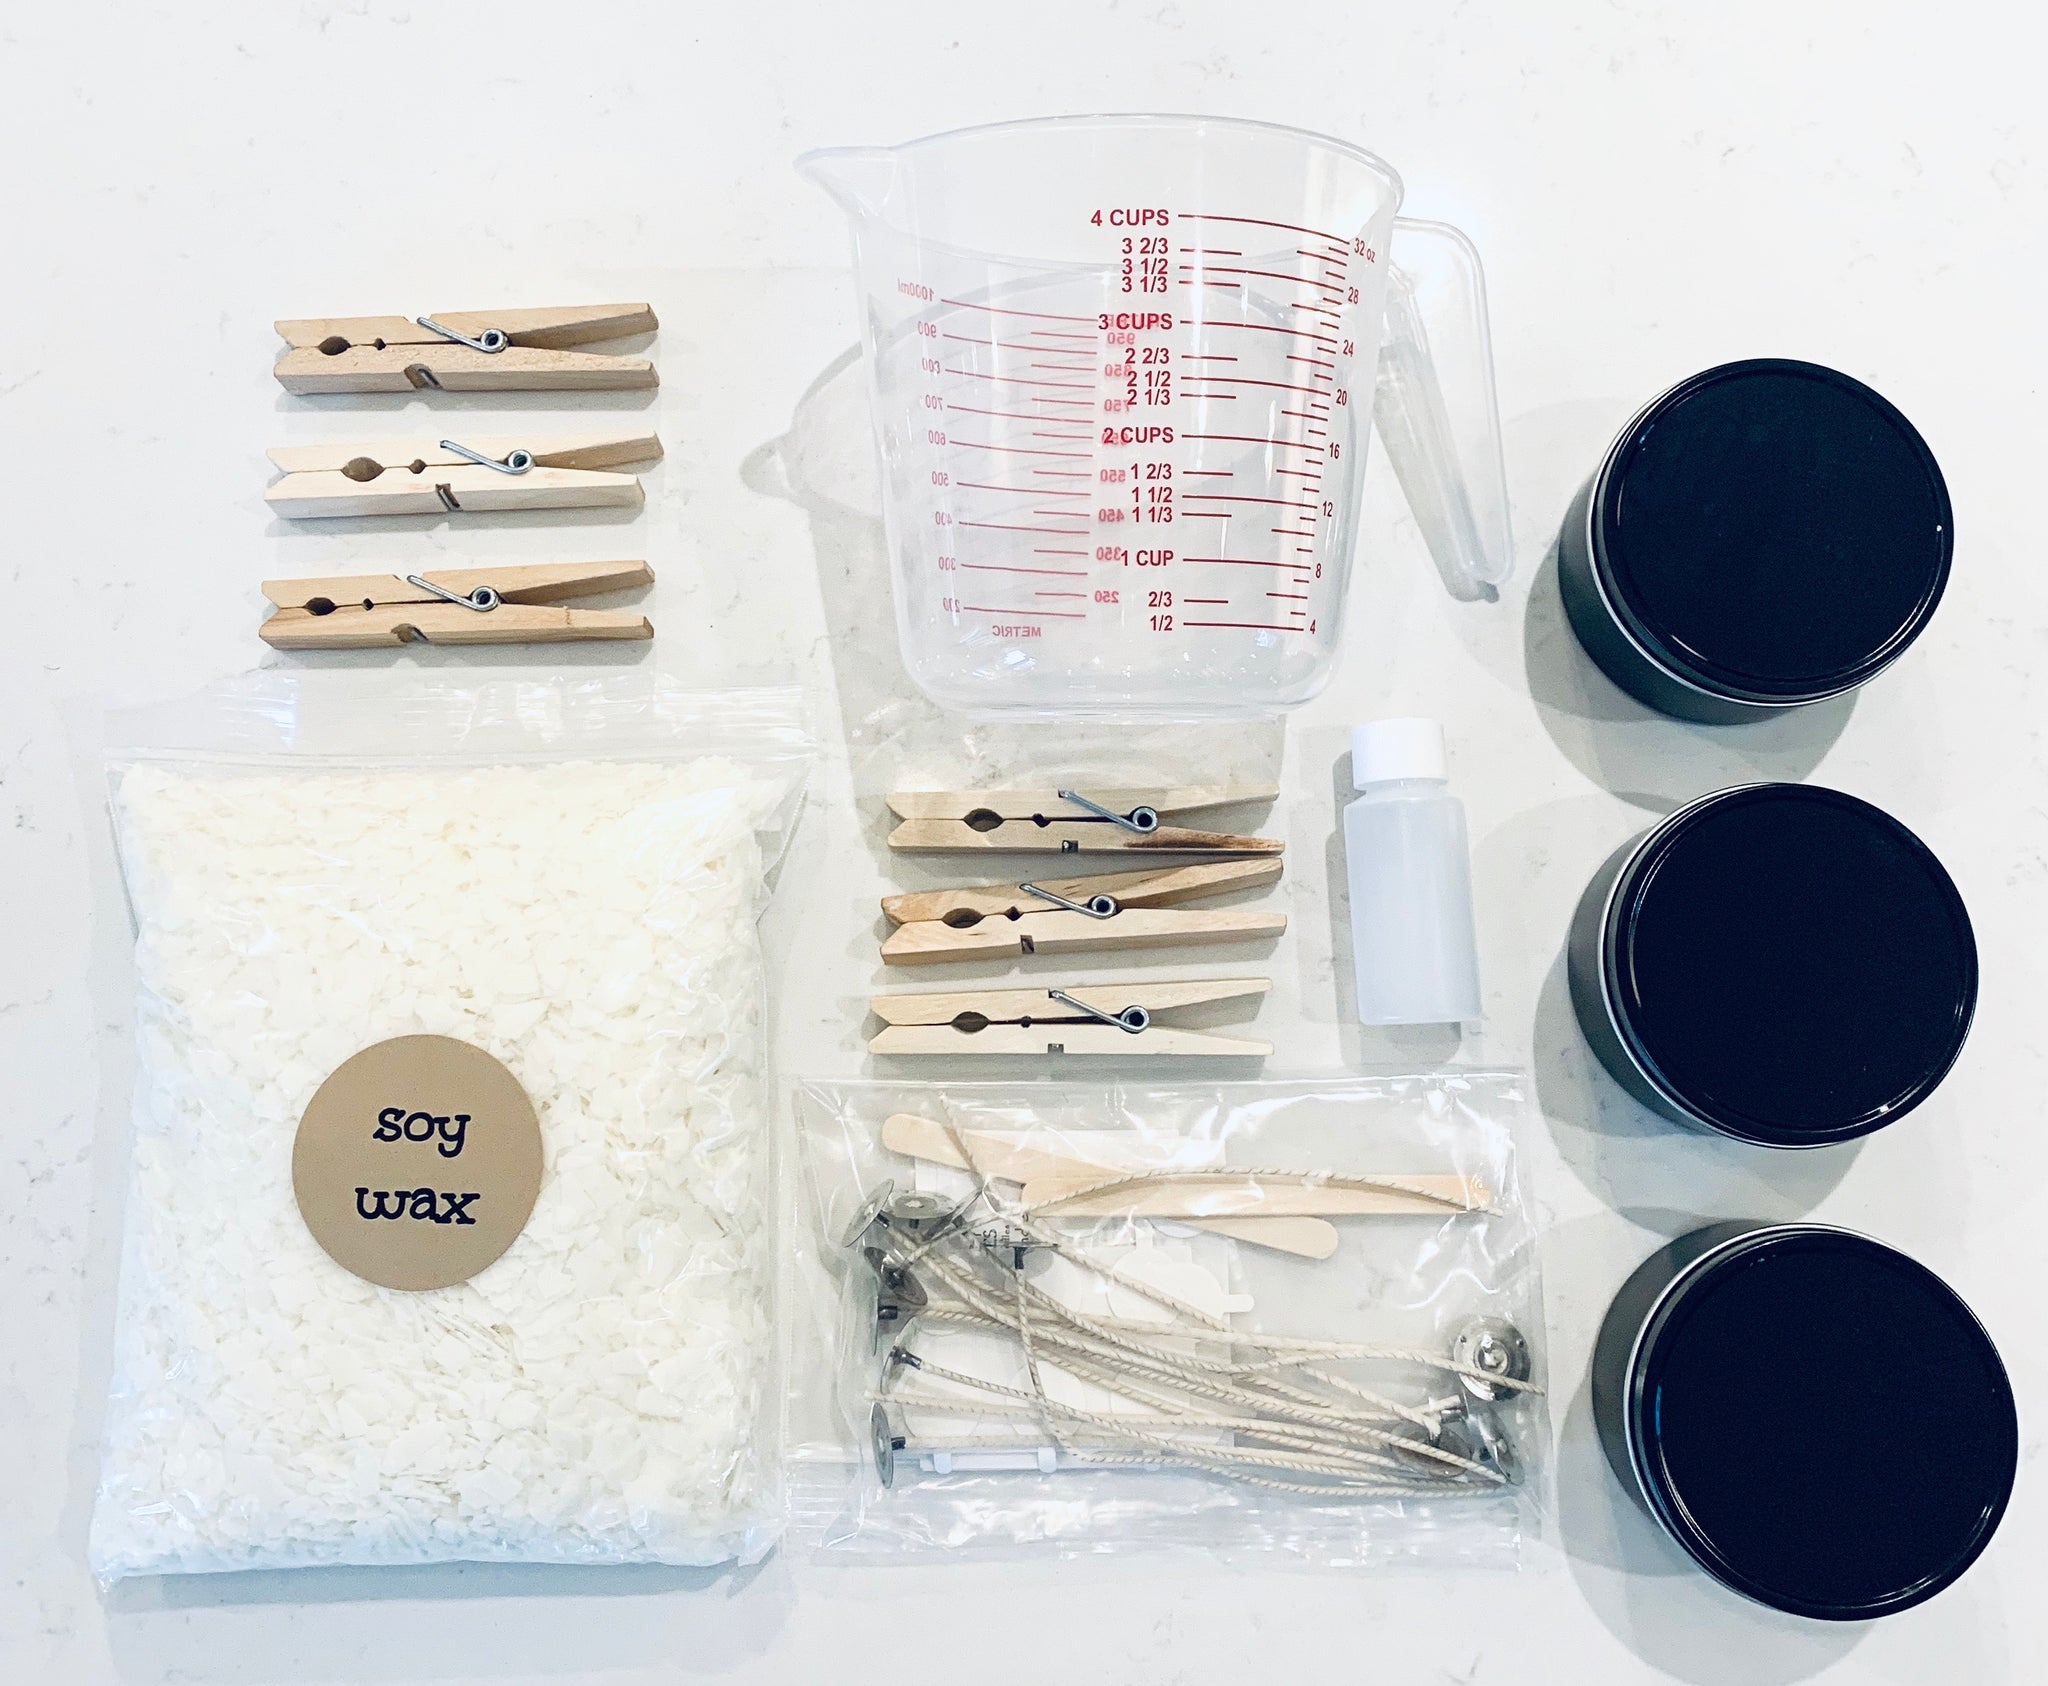 House of EQ DIY Scented Soy Candle Making Kit